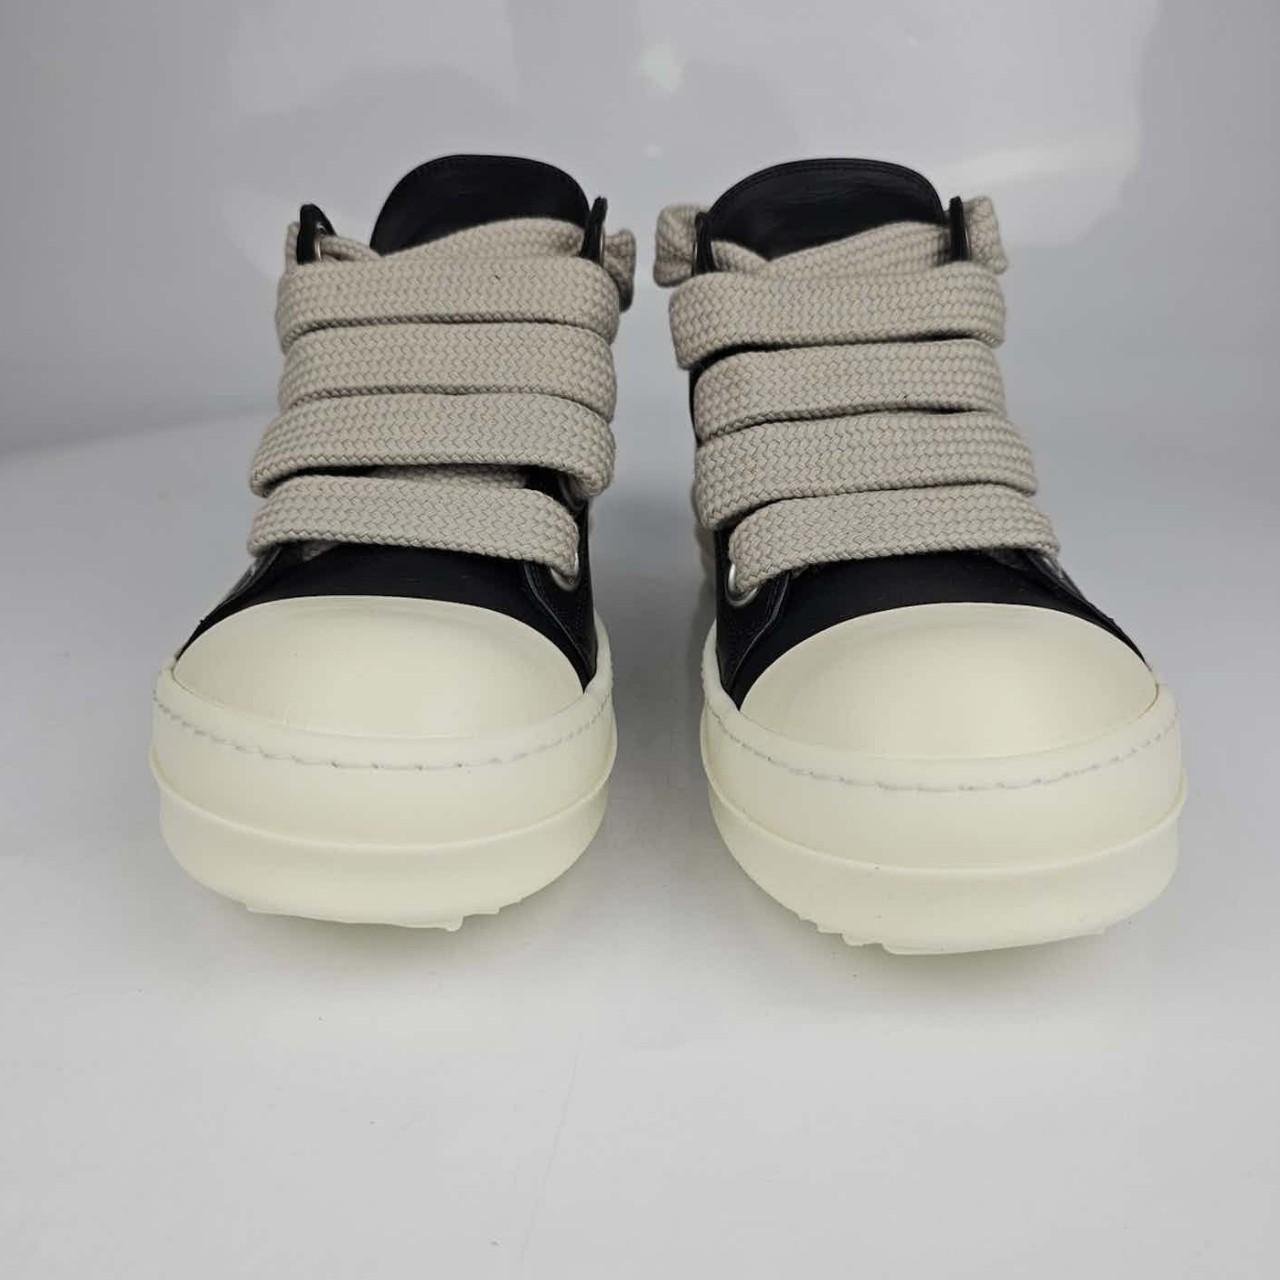 100% Authenticated Rick Owens Jumbo Lace lows size... - Depop